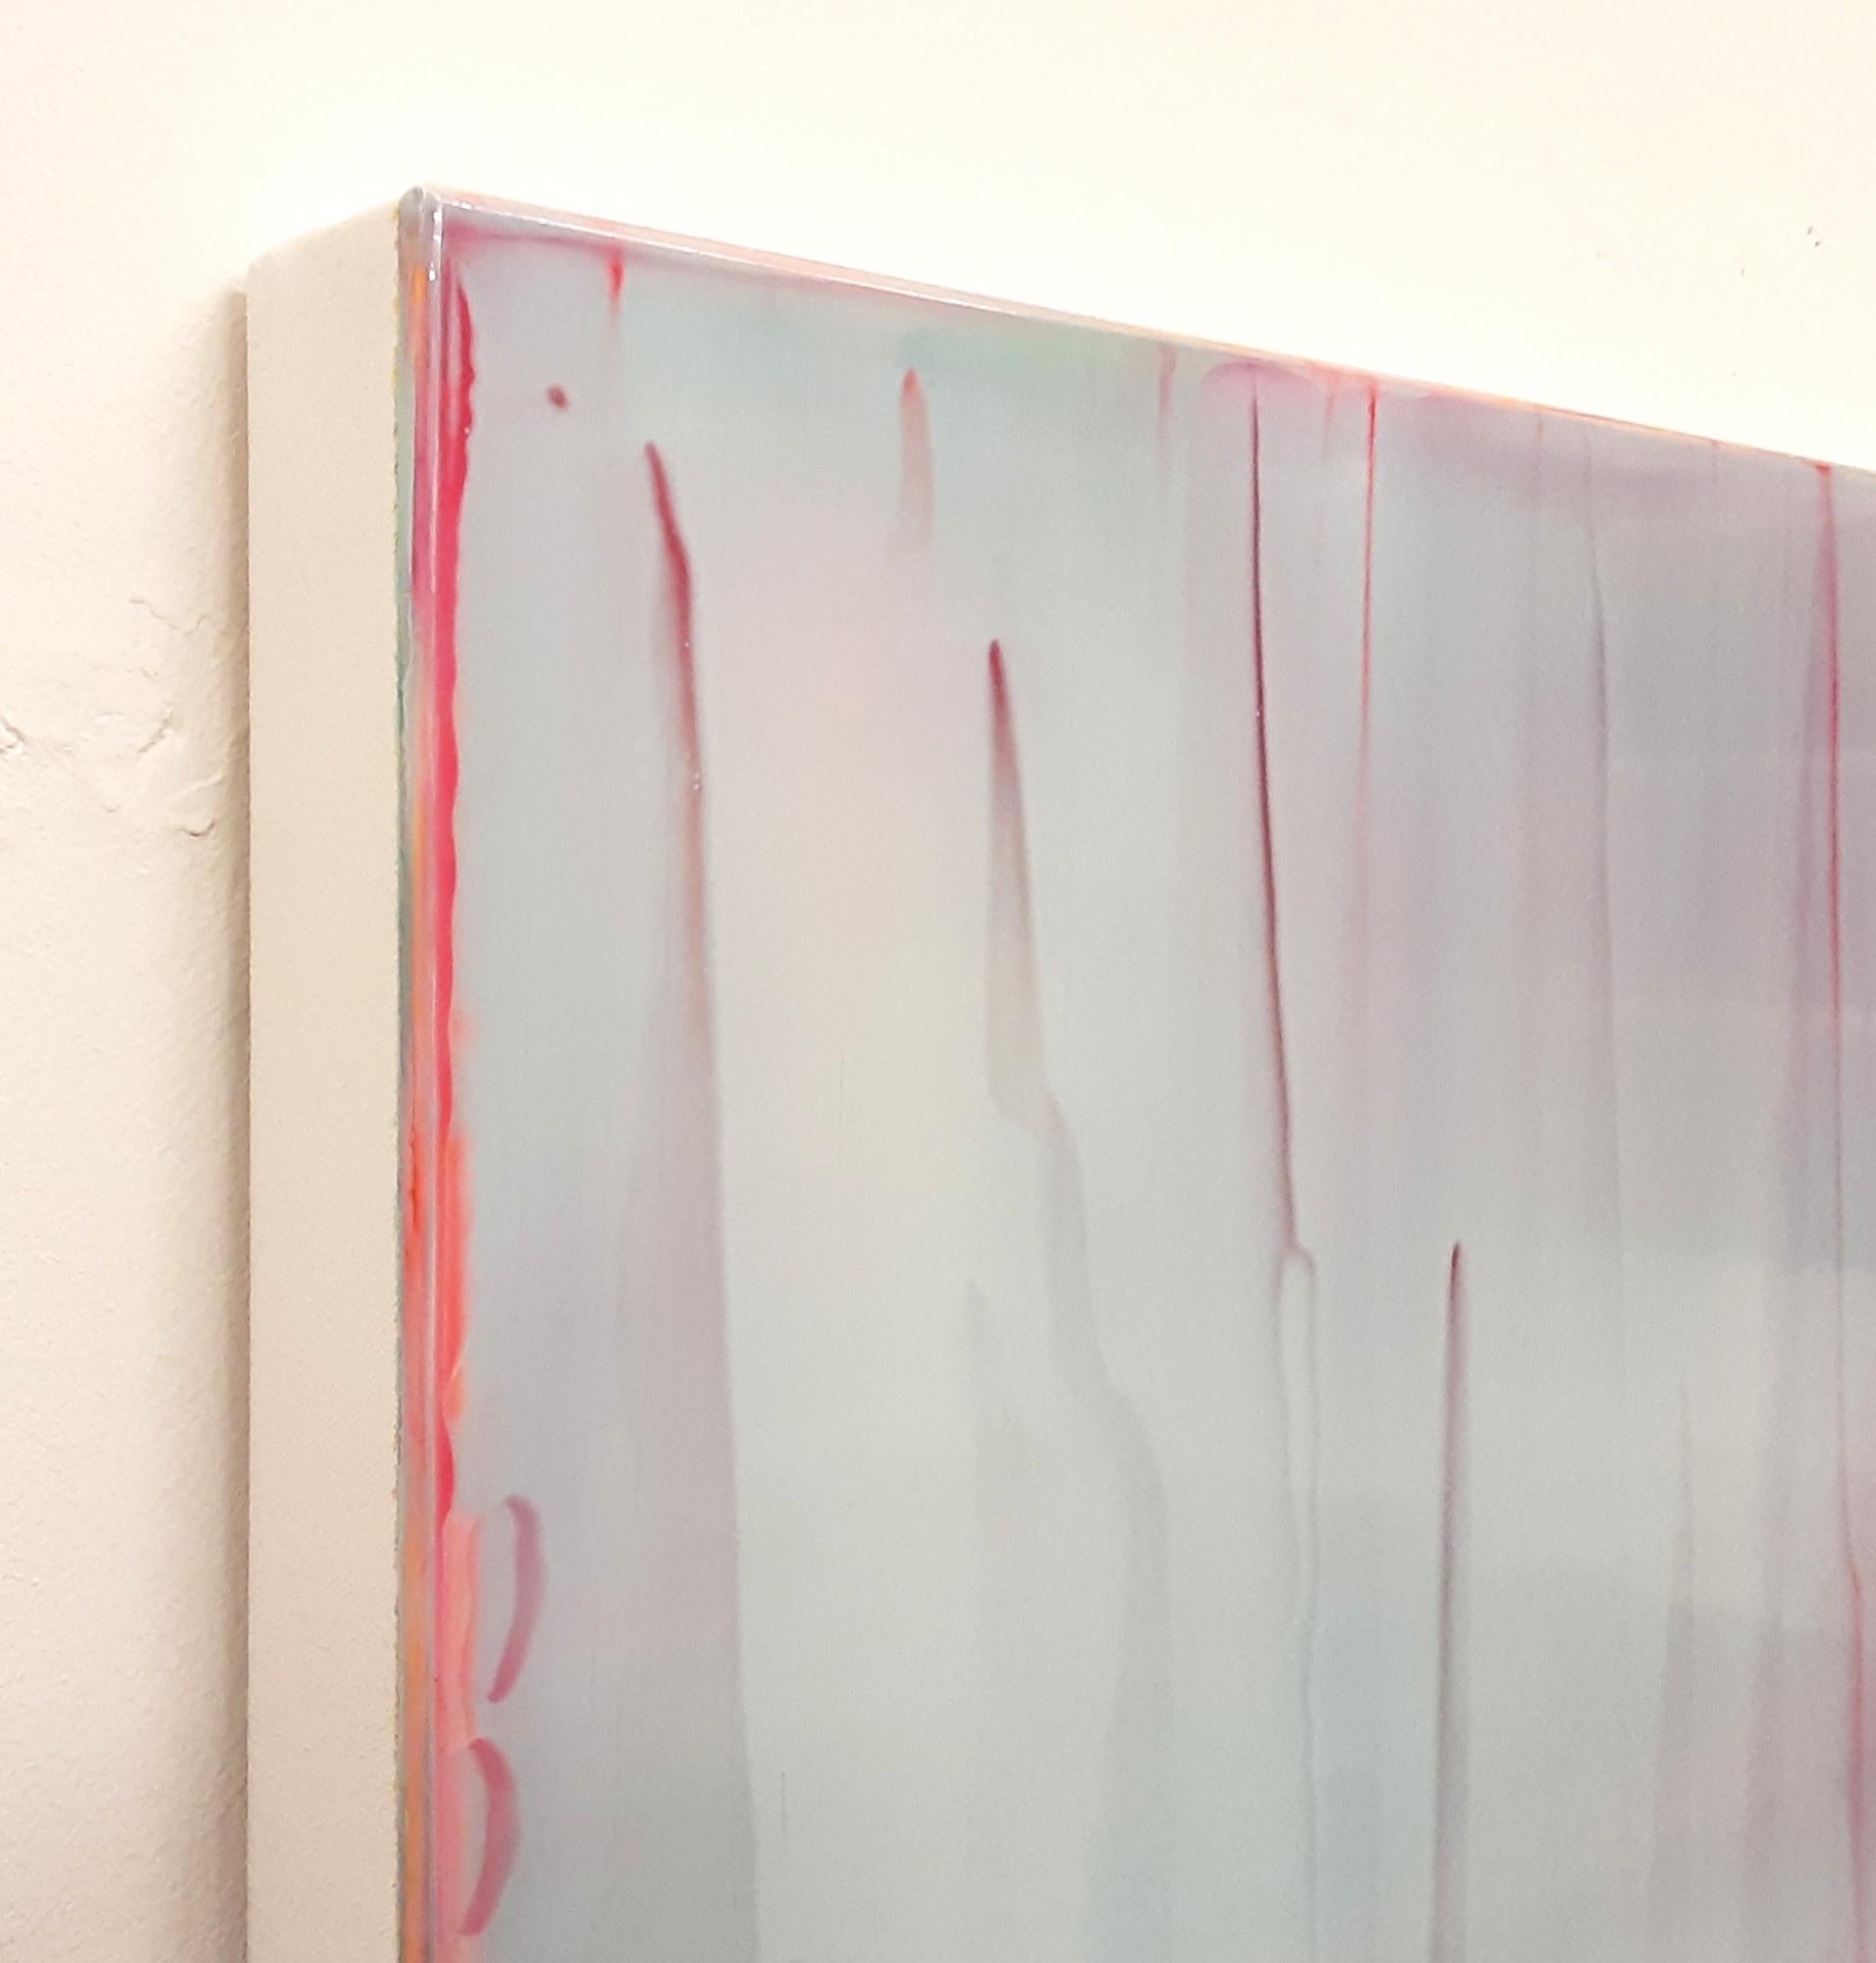 Lucent (4/19) by James Lumsden - Abstract colour painting, pink and light blue For Sale 5